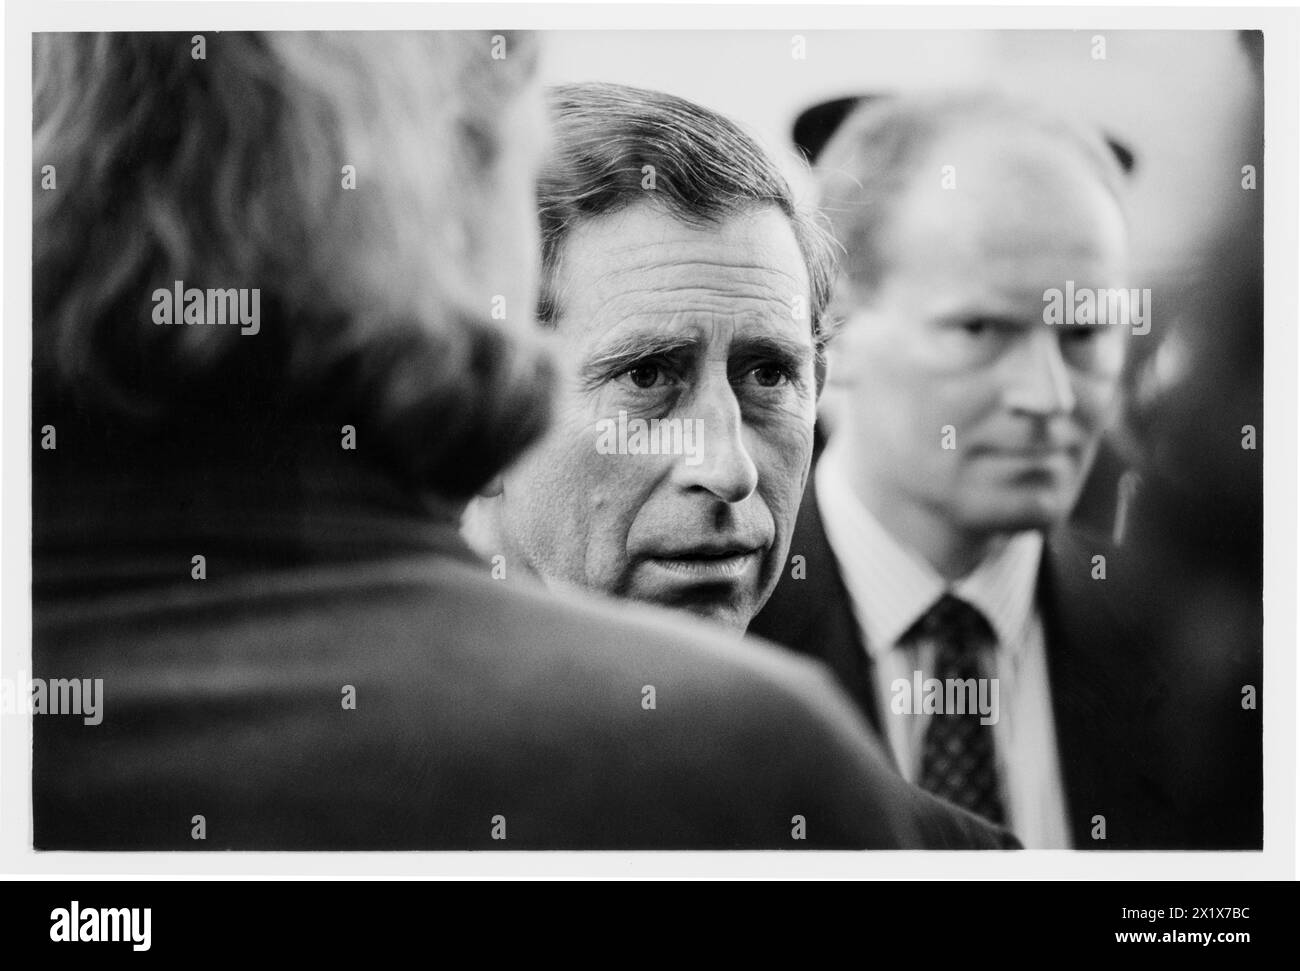 PRINCE CHARLES, KING CHARLES, PRINCE OF WALES, 1995: Prince Charles, the Prince of Wales, opens new student halls at Cardiff University, 15 November 1995. Archive Picture: Rob Watkins/Alamy Stock Photo